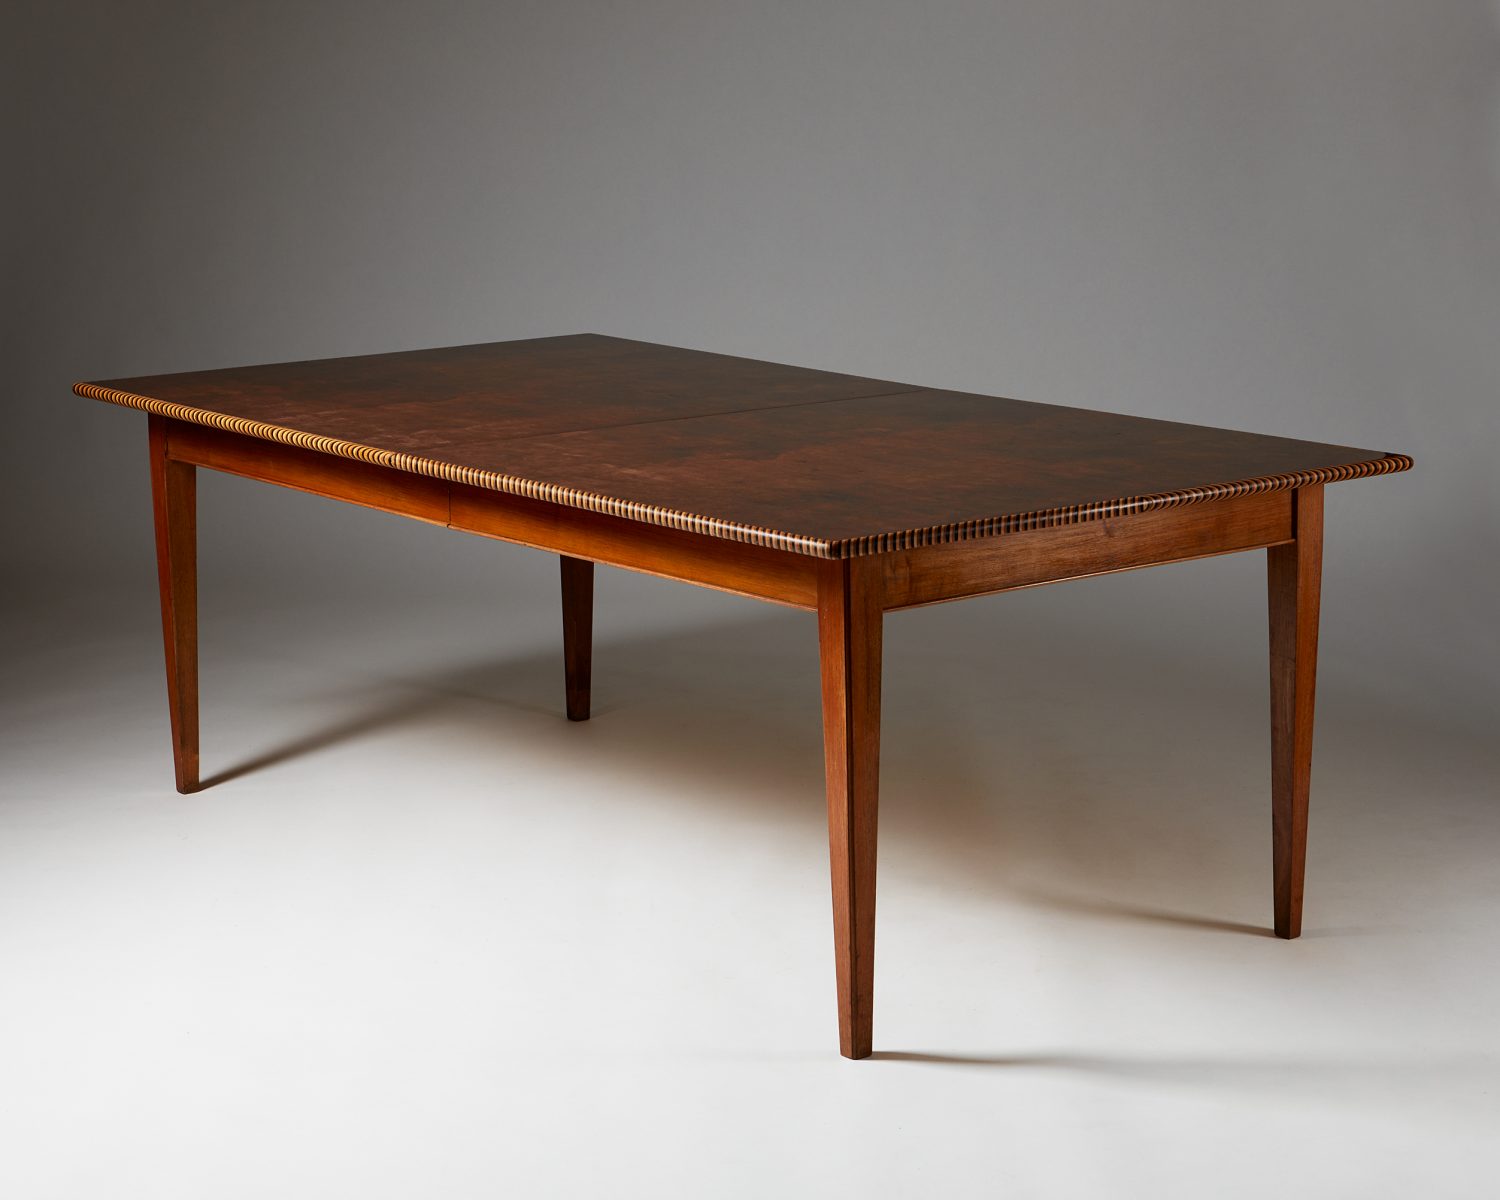 Dining table, designed by Josef Frank, — Modernity